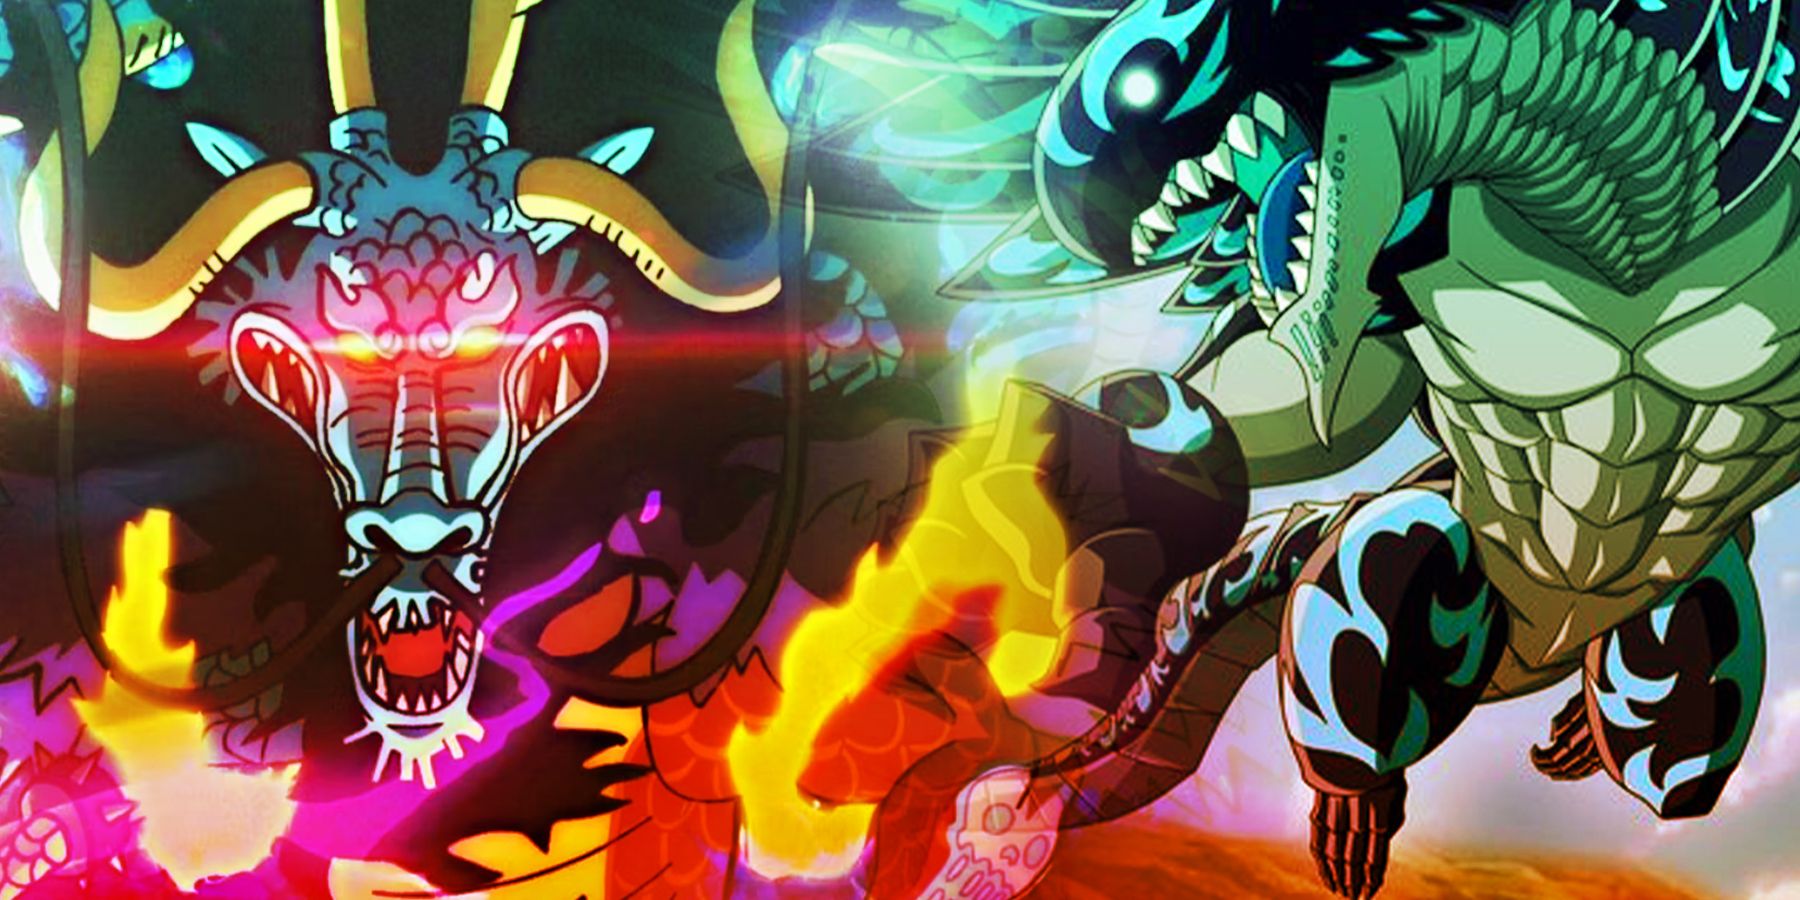 Kaido of One Piece and Acnologia of Fairy Tale, both in dragon form